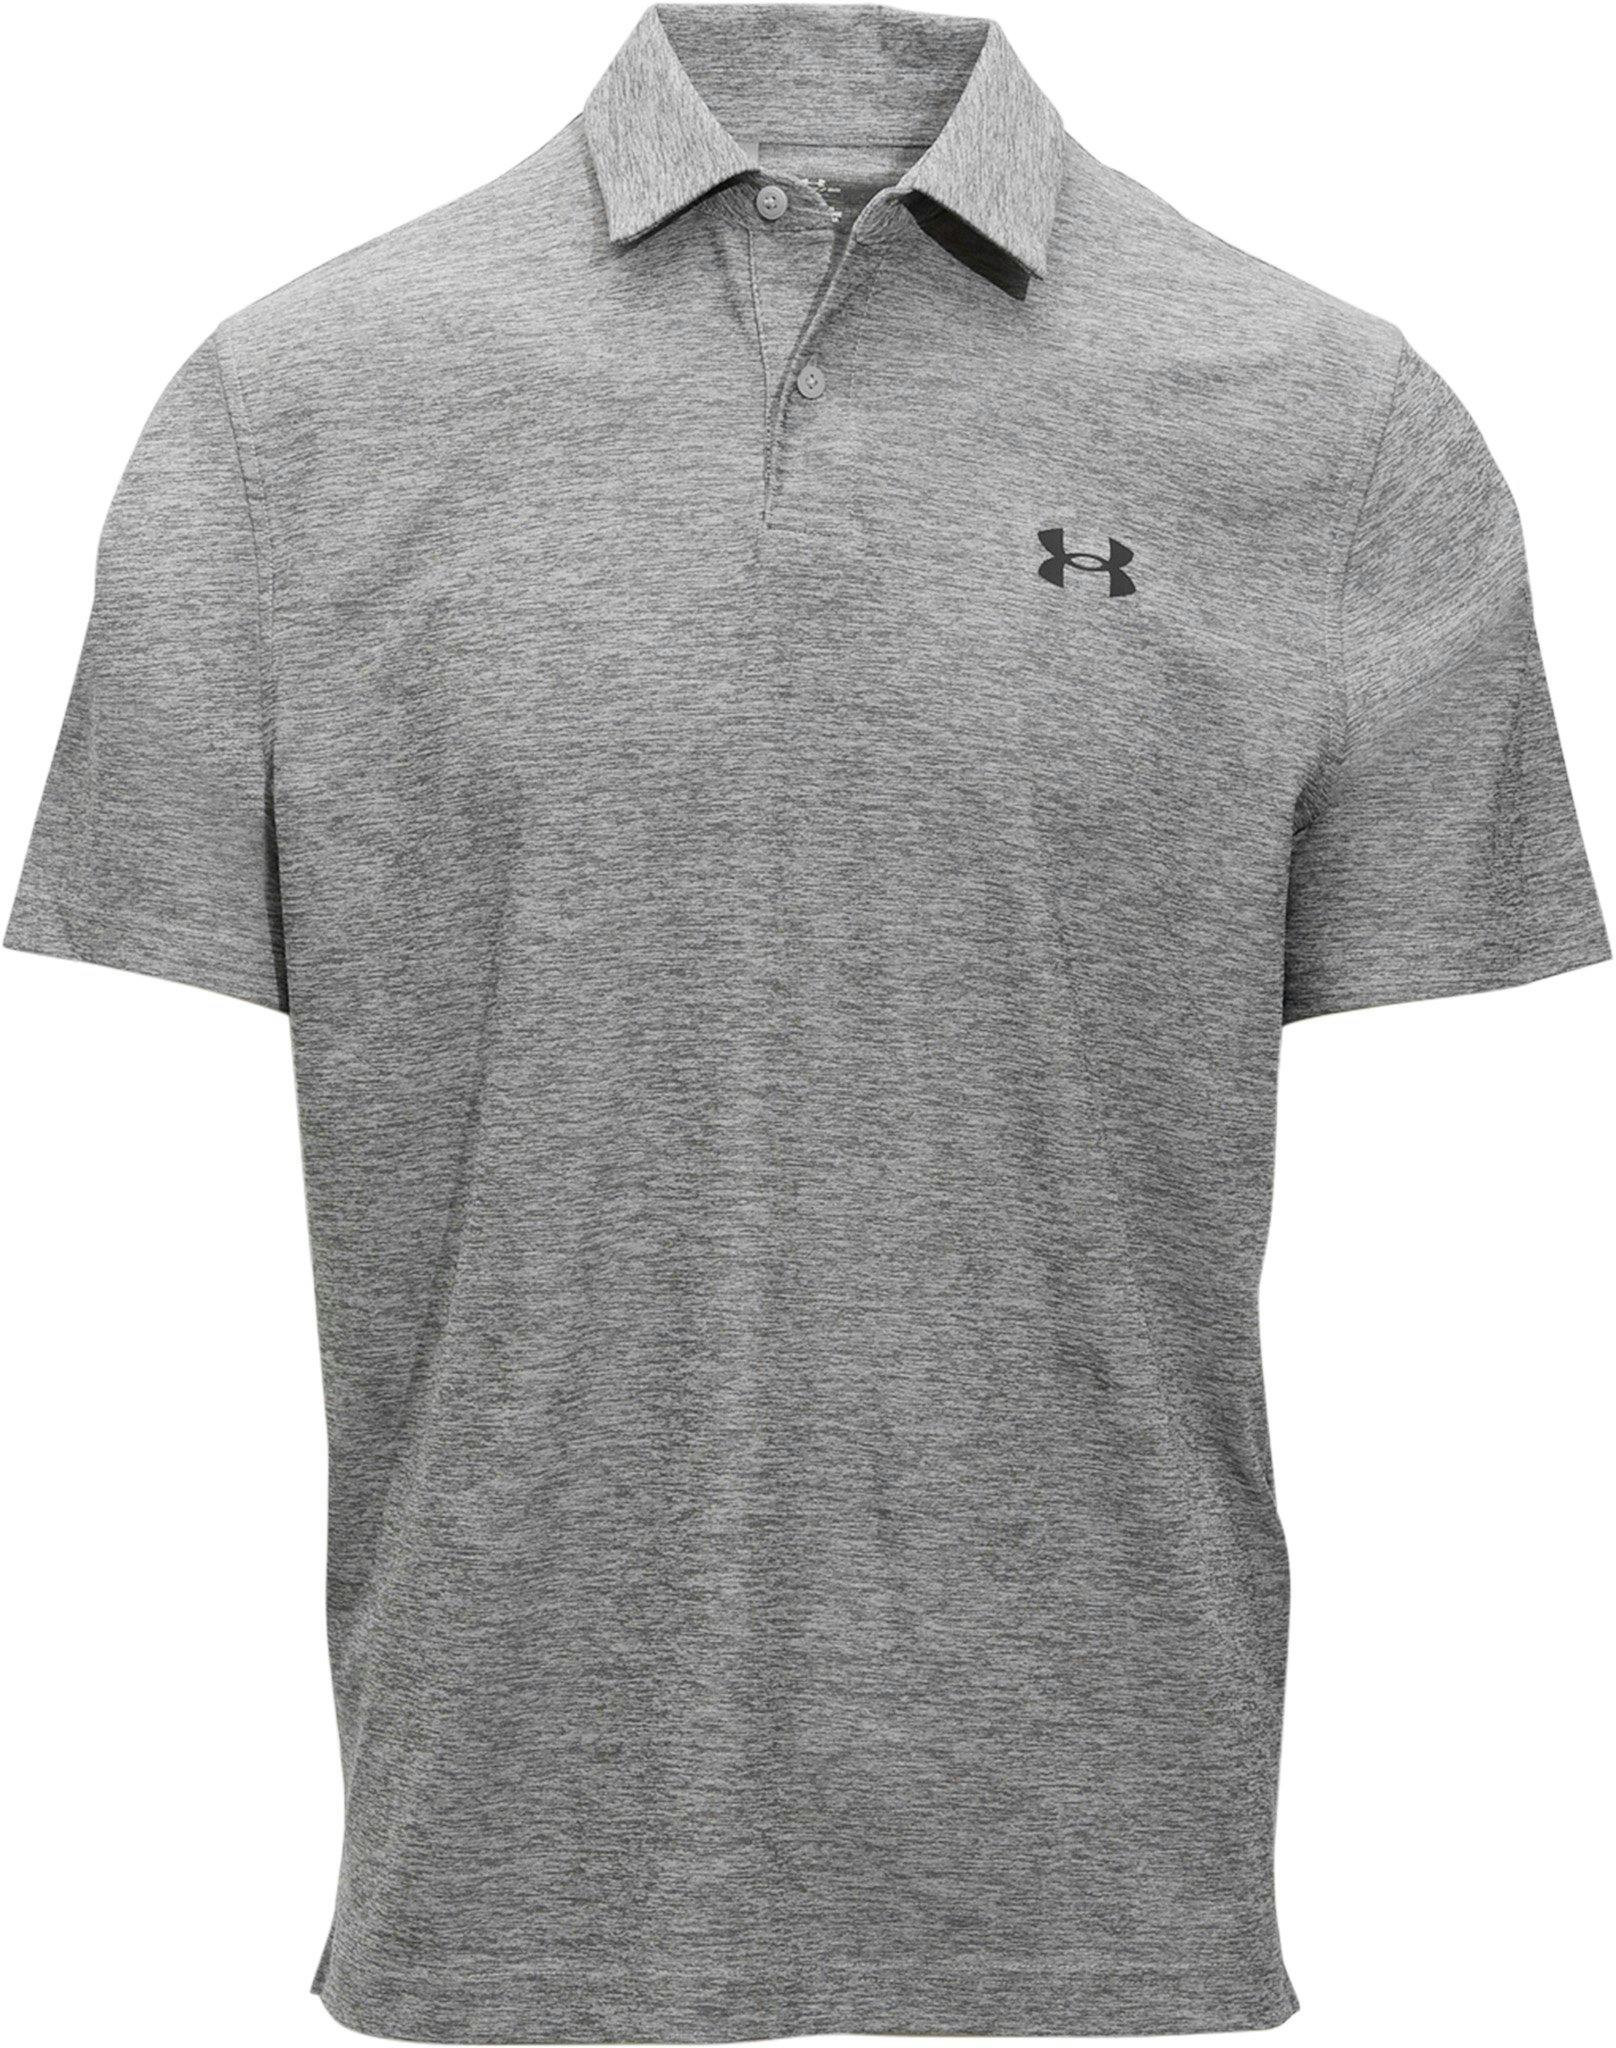 Product image for UA Tee To Green Polo - Men's